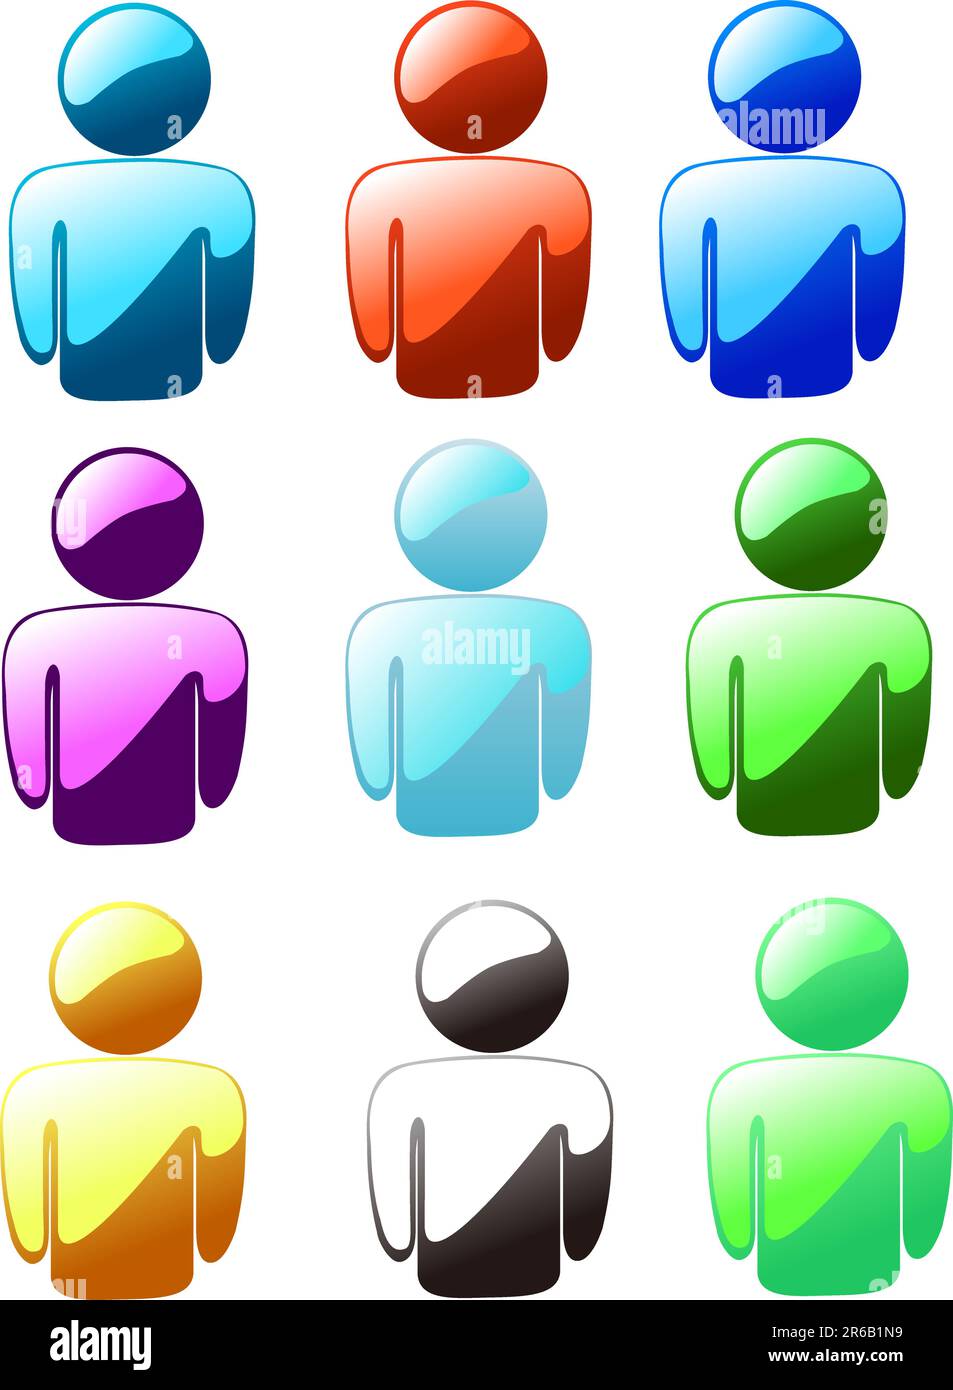 people user icon on white background Stock Vector